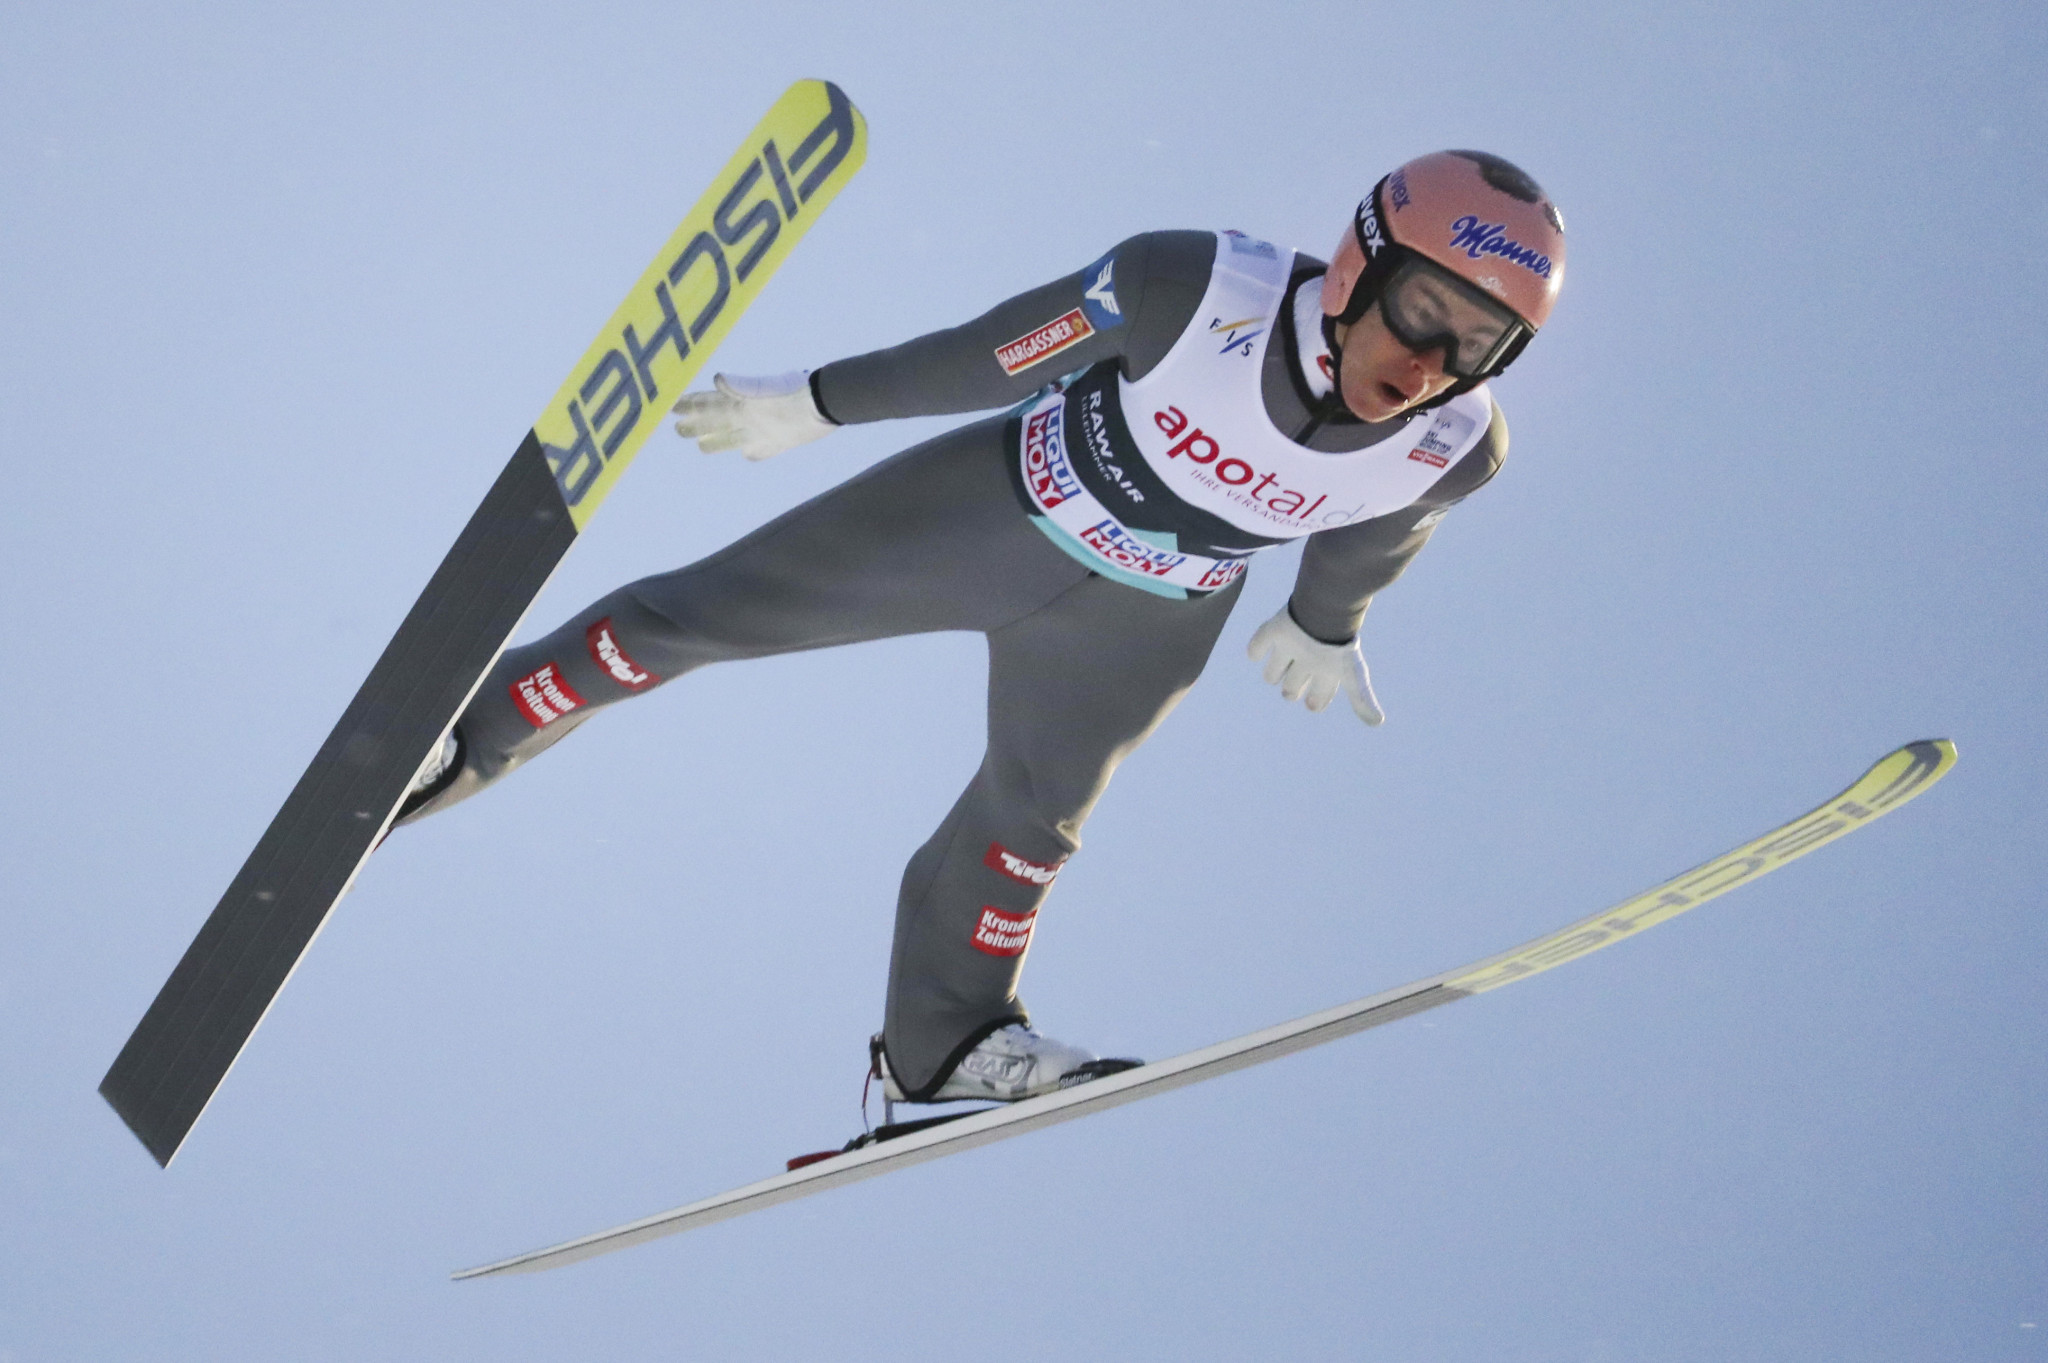 Kraft takes Raw Air Tournament lead after topping qualification standings at FIS Ski Jumping World Cup in Trondheim